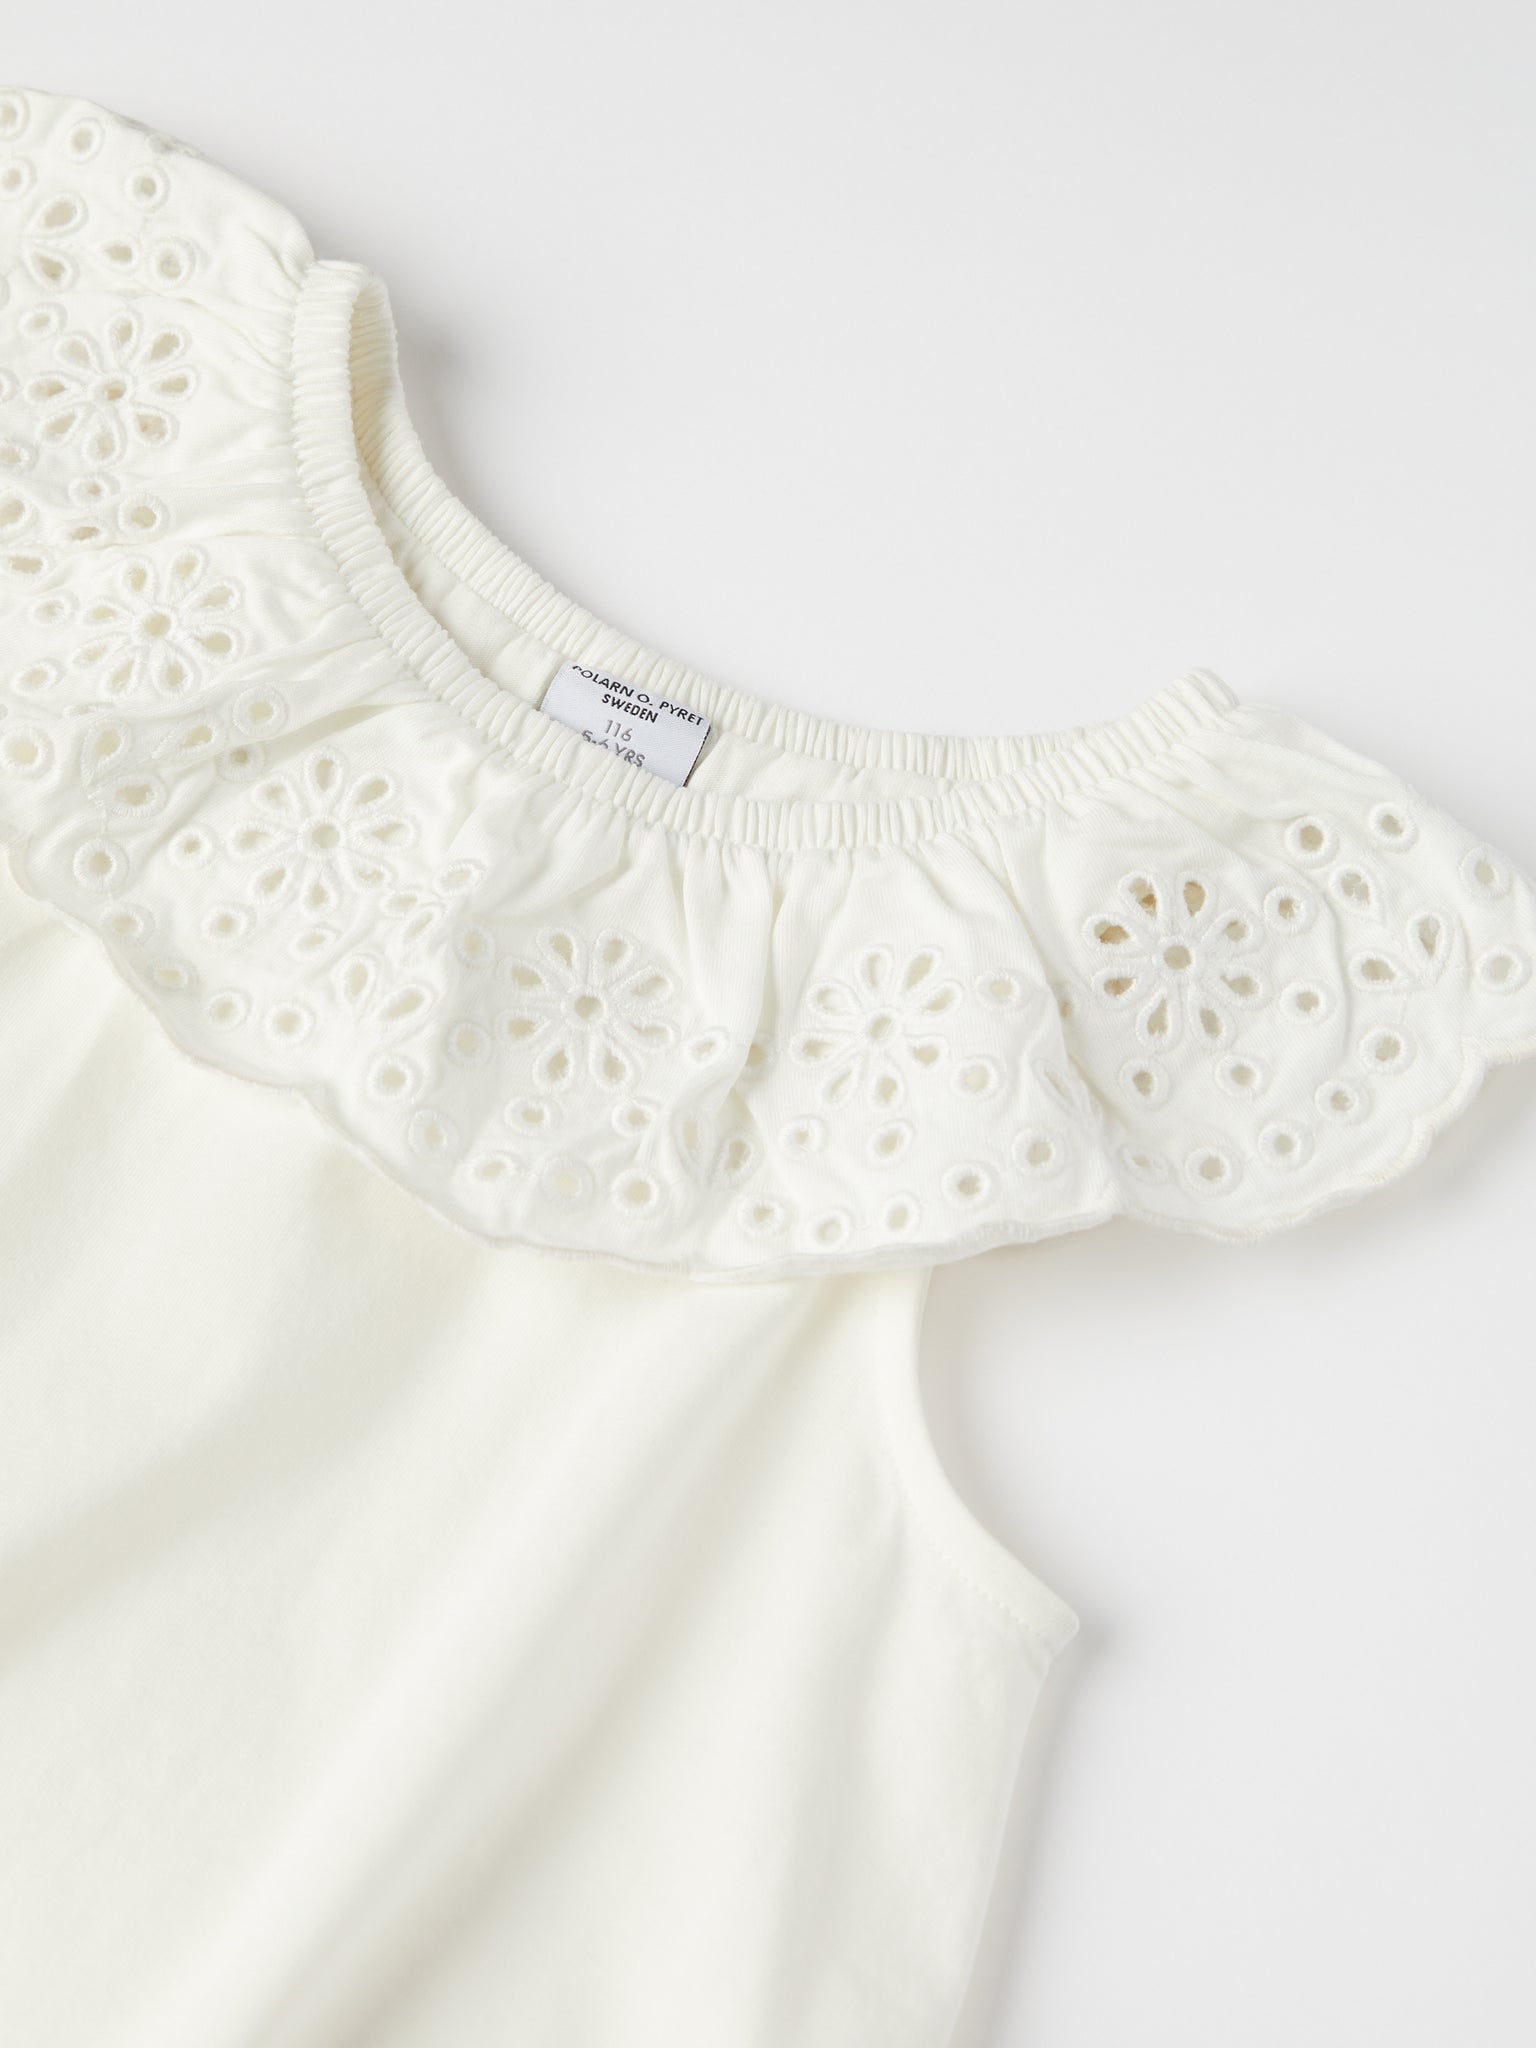 White Embroidered Kids Top from the Polarn O. Pyret kidswear collection. Nordic kids clothes made from sustainable sources.